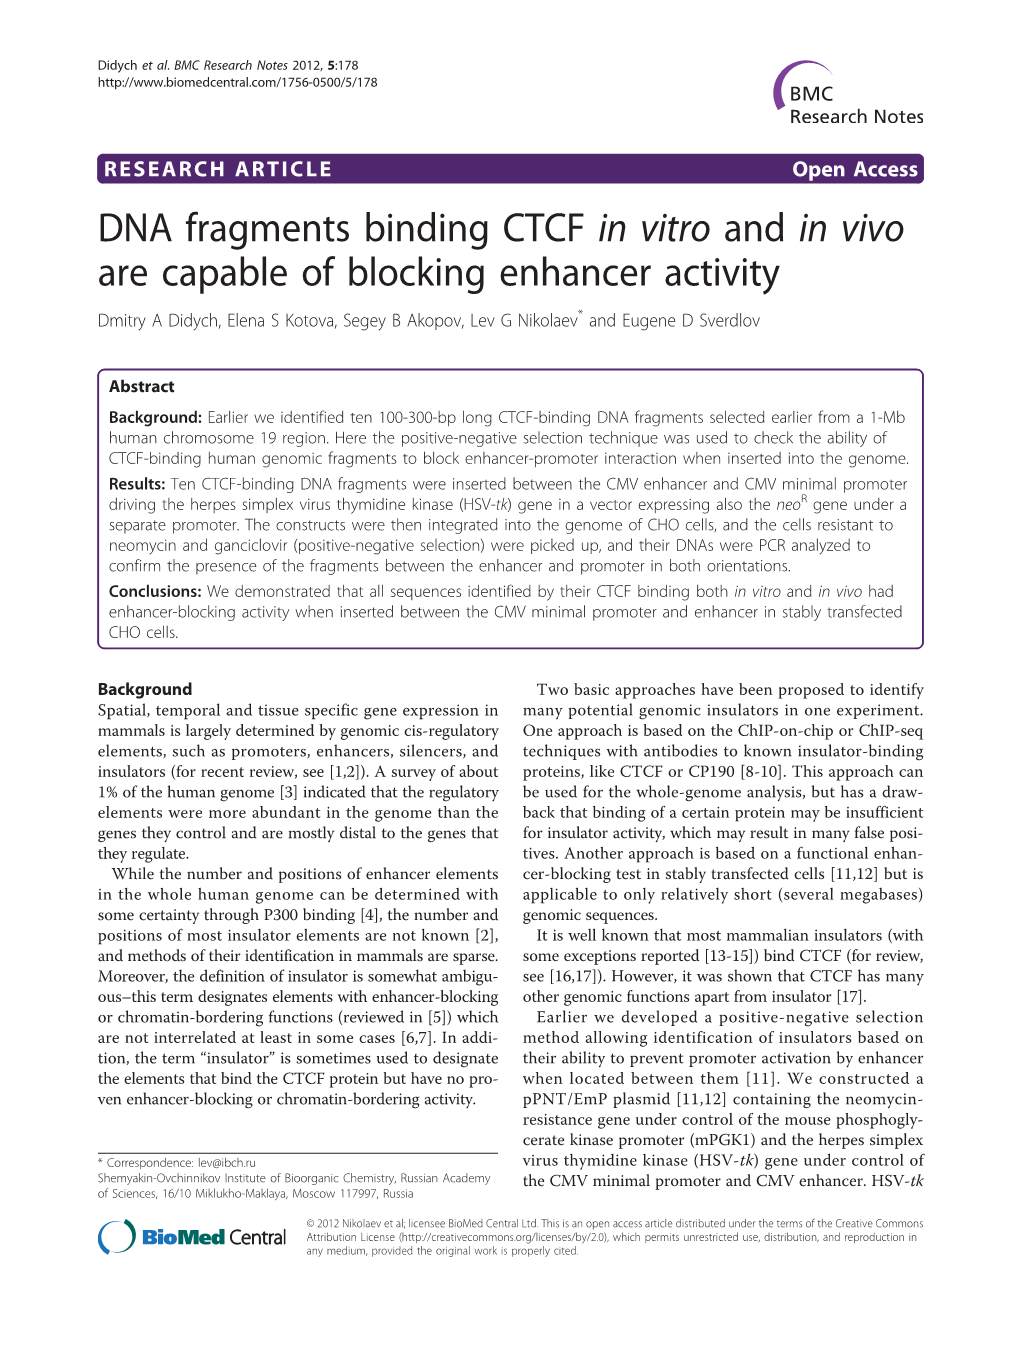 DNA Fragments Binding CTCF in Vitro and in Vivo Are Capable of Blocking